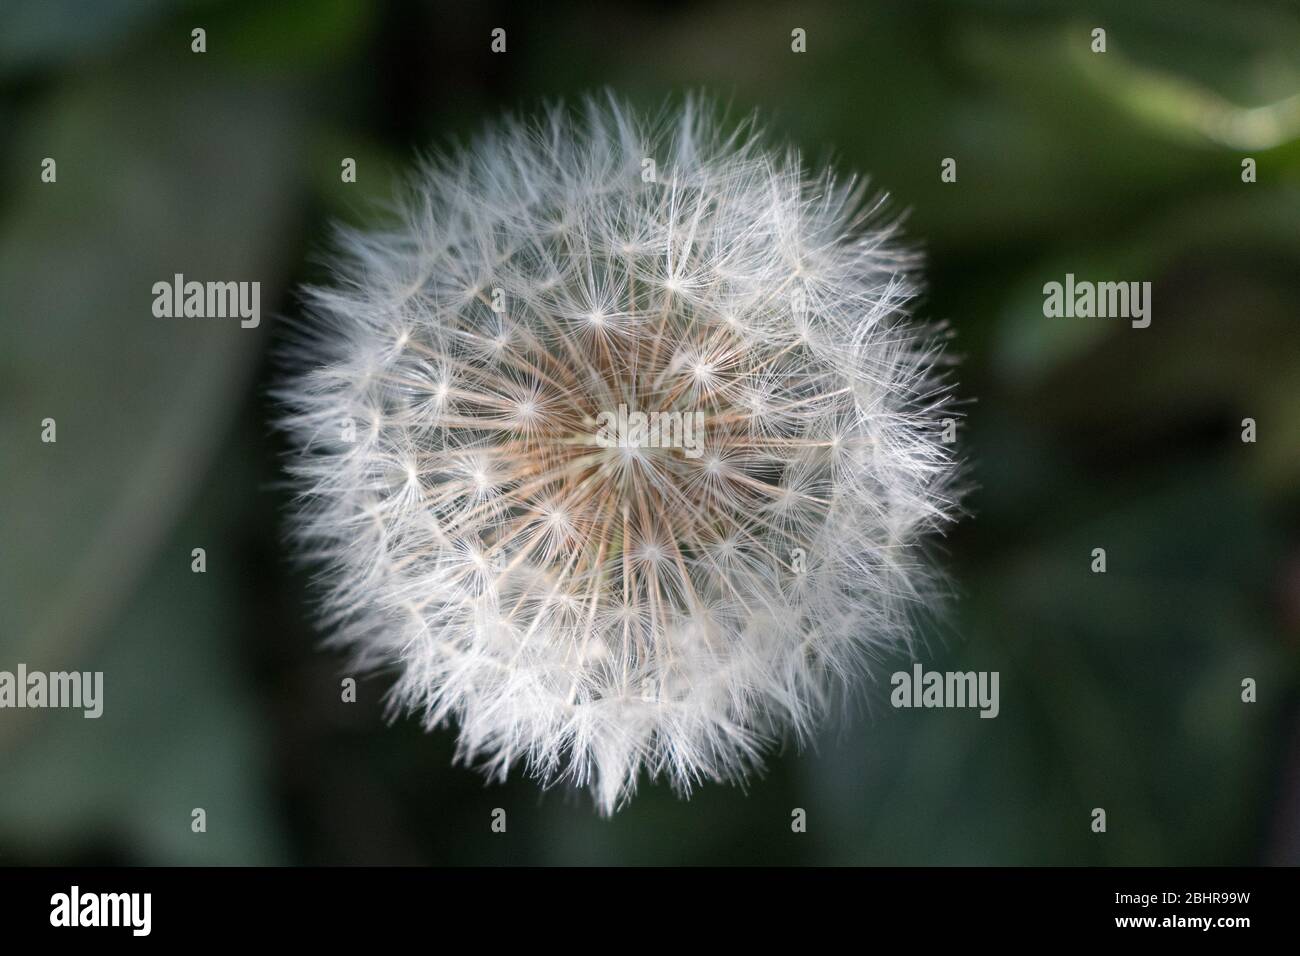 Beautiful dandelion seed head showing off its extremely fine detail. Stock Photo